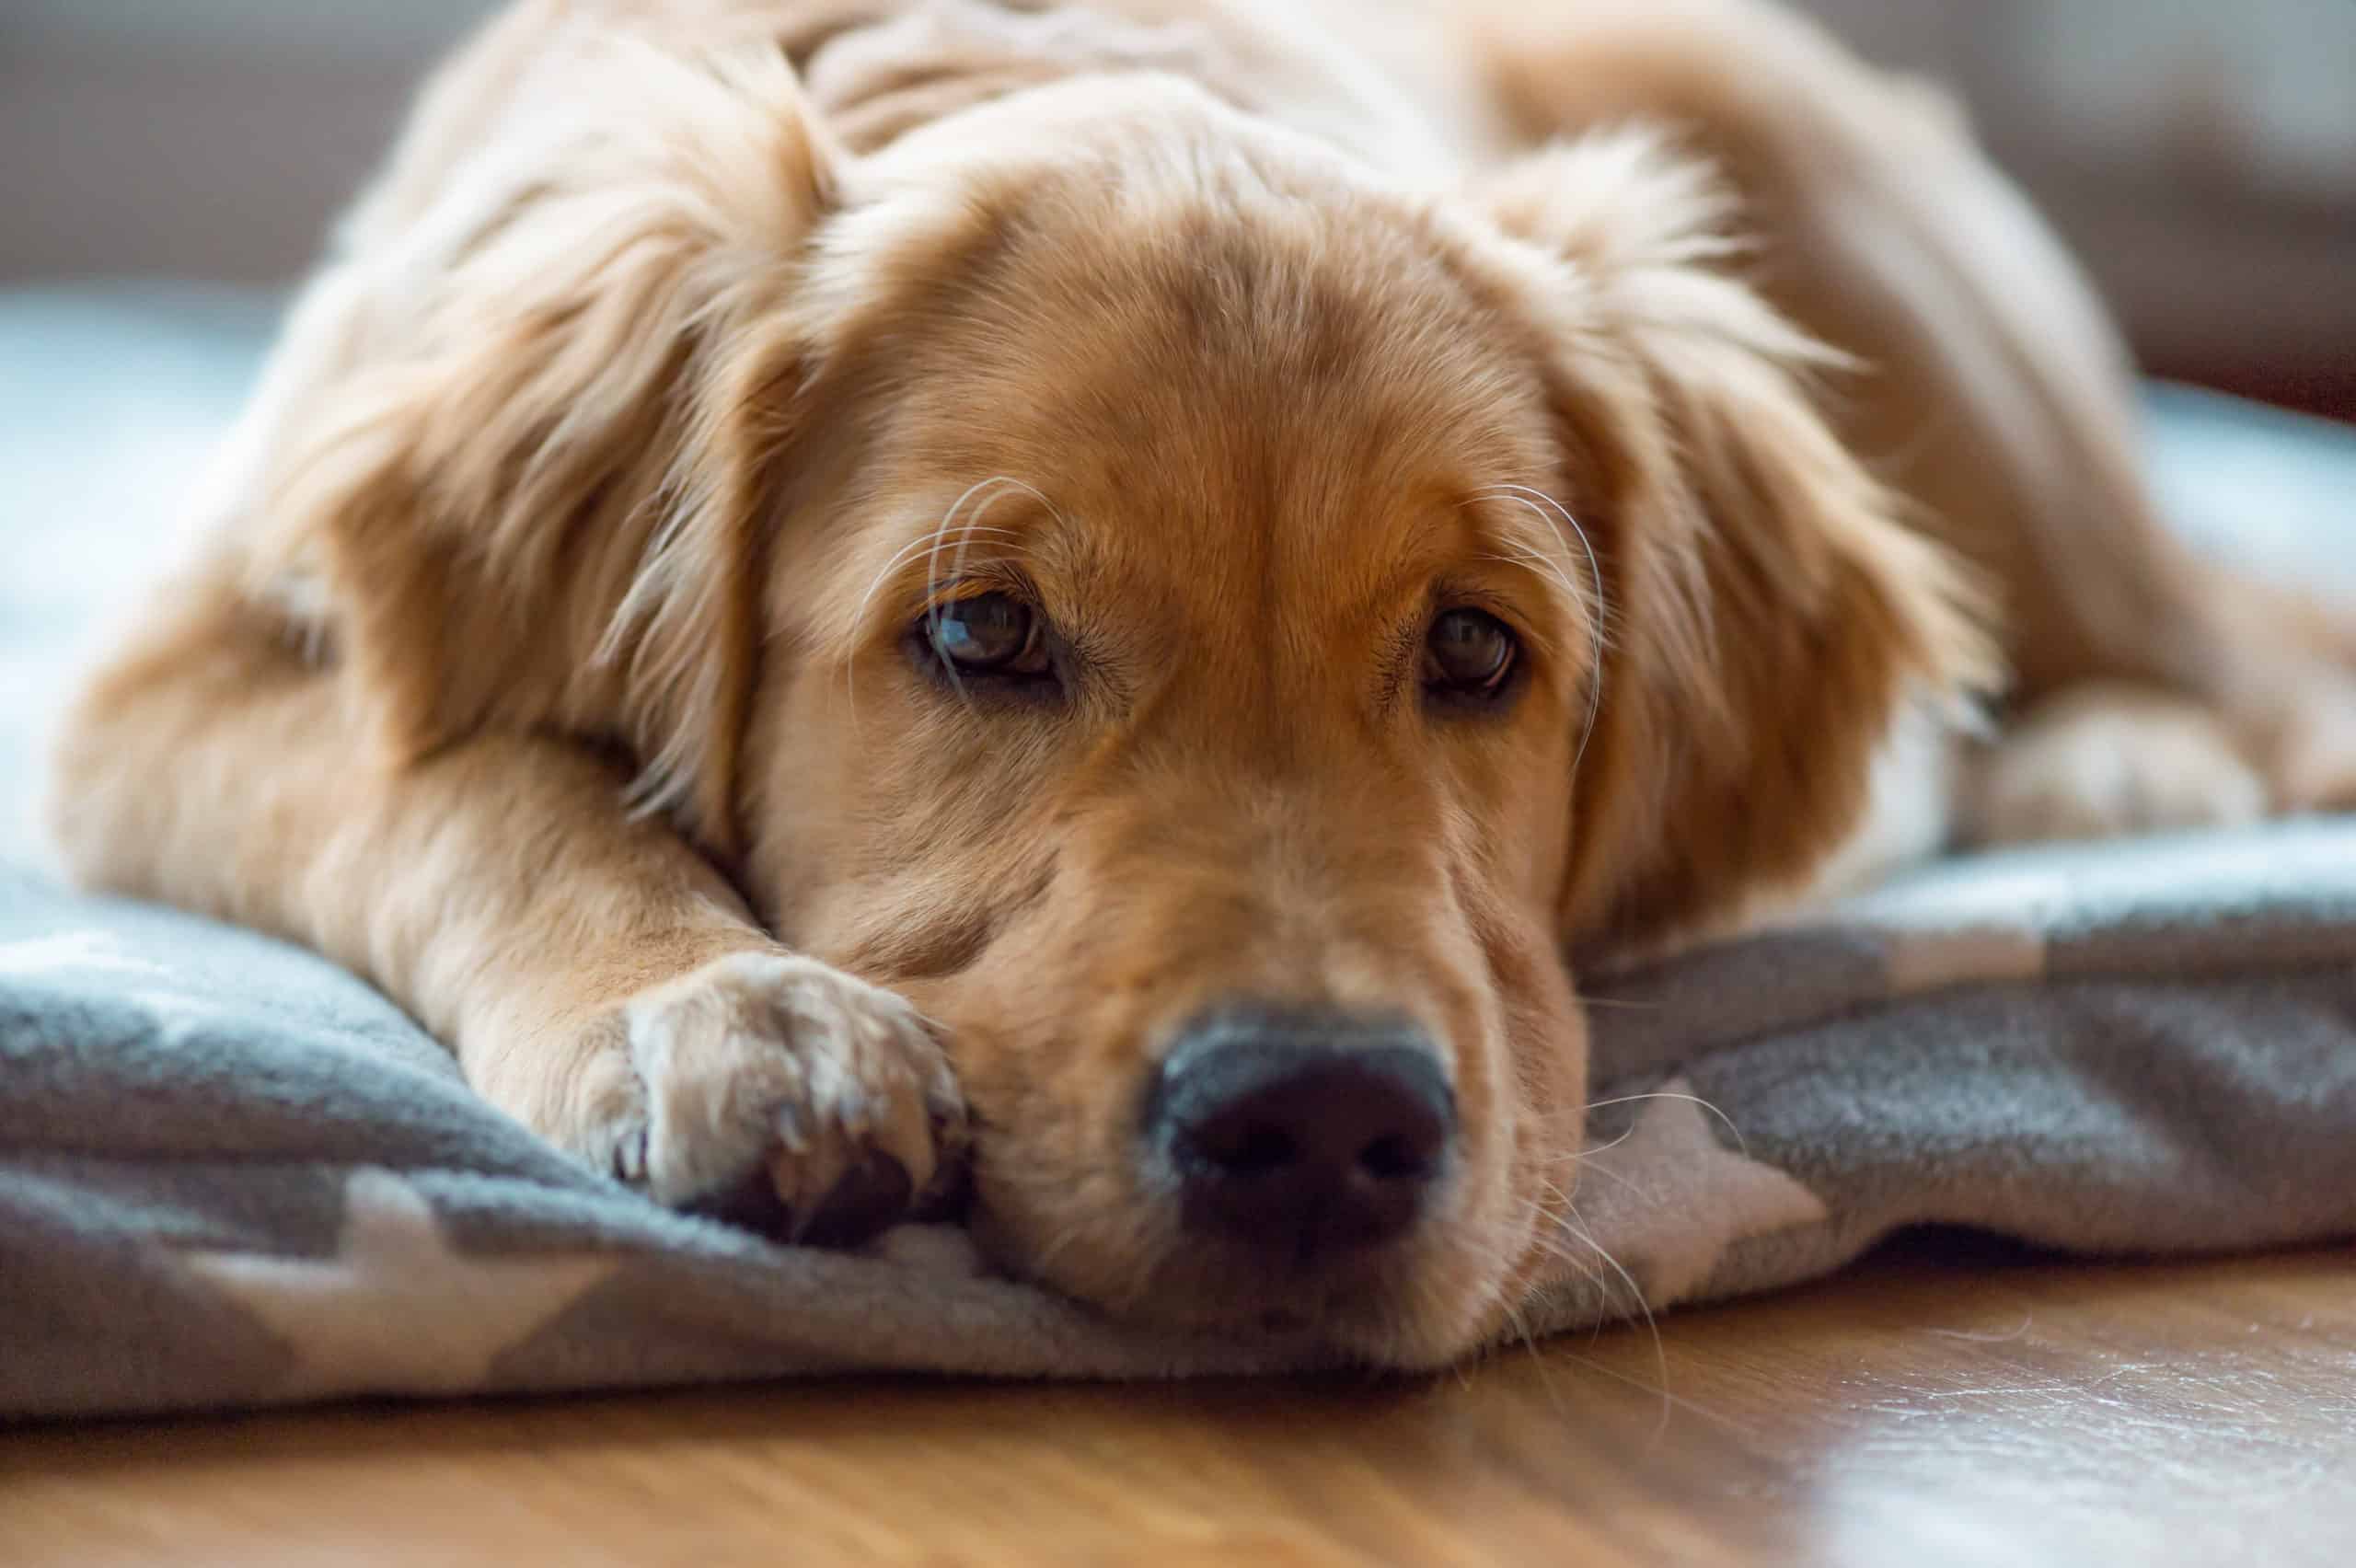 Why Won’t My Dog Sleep After Getting Neutered?